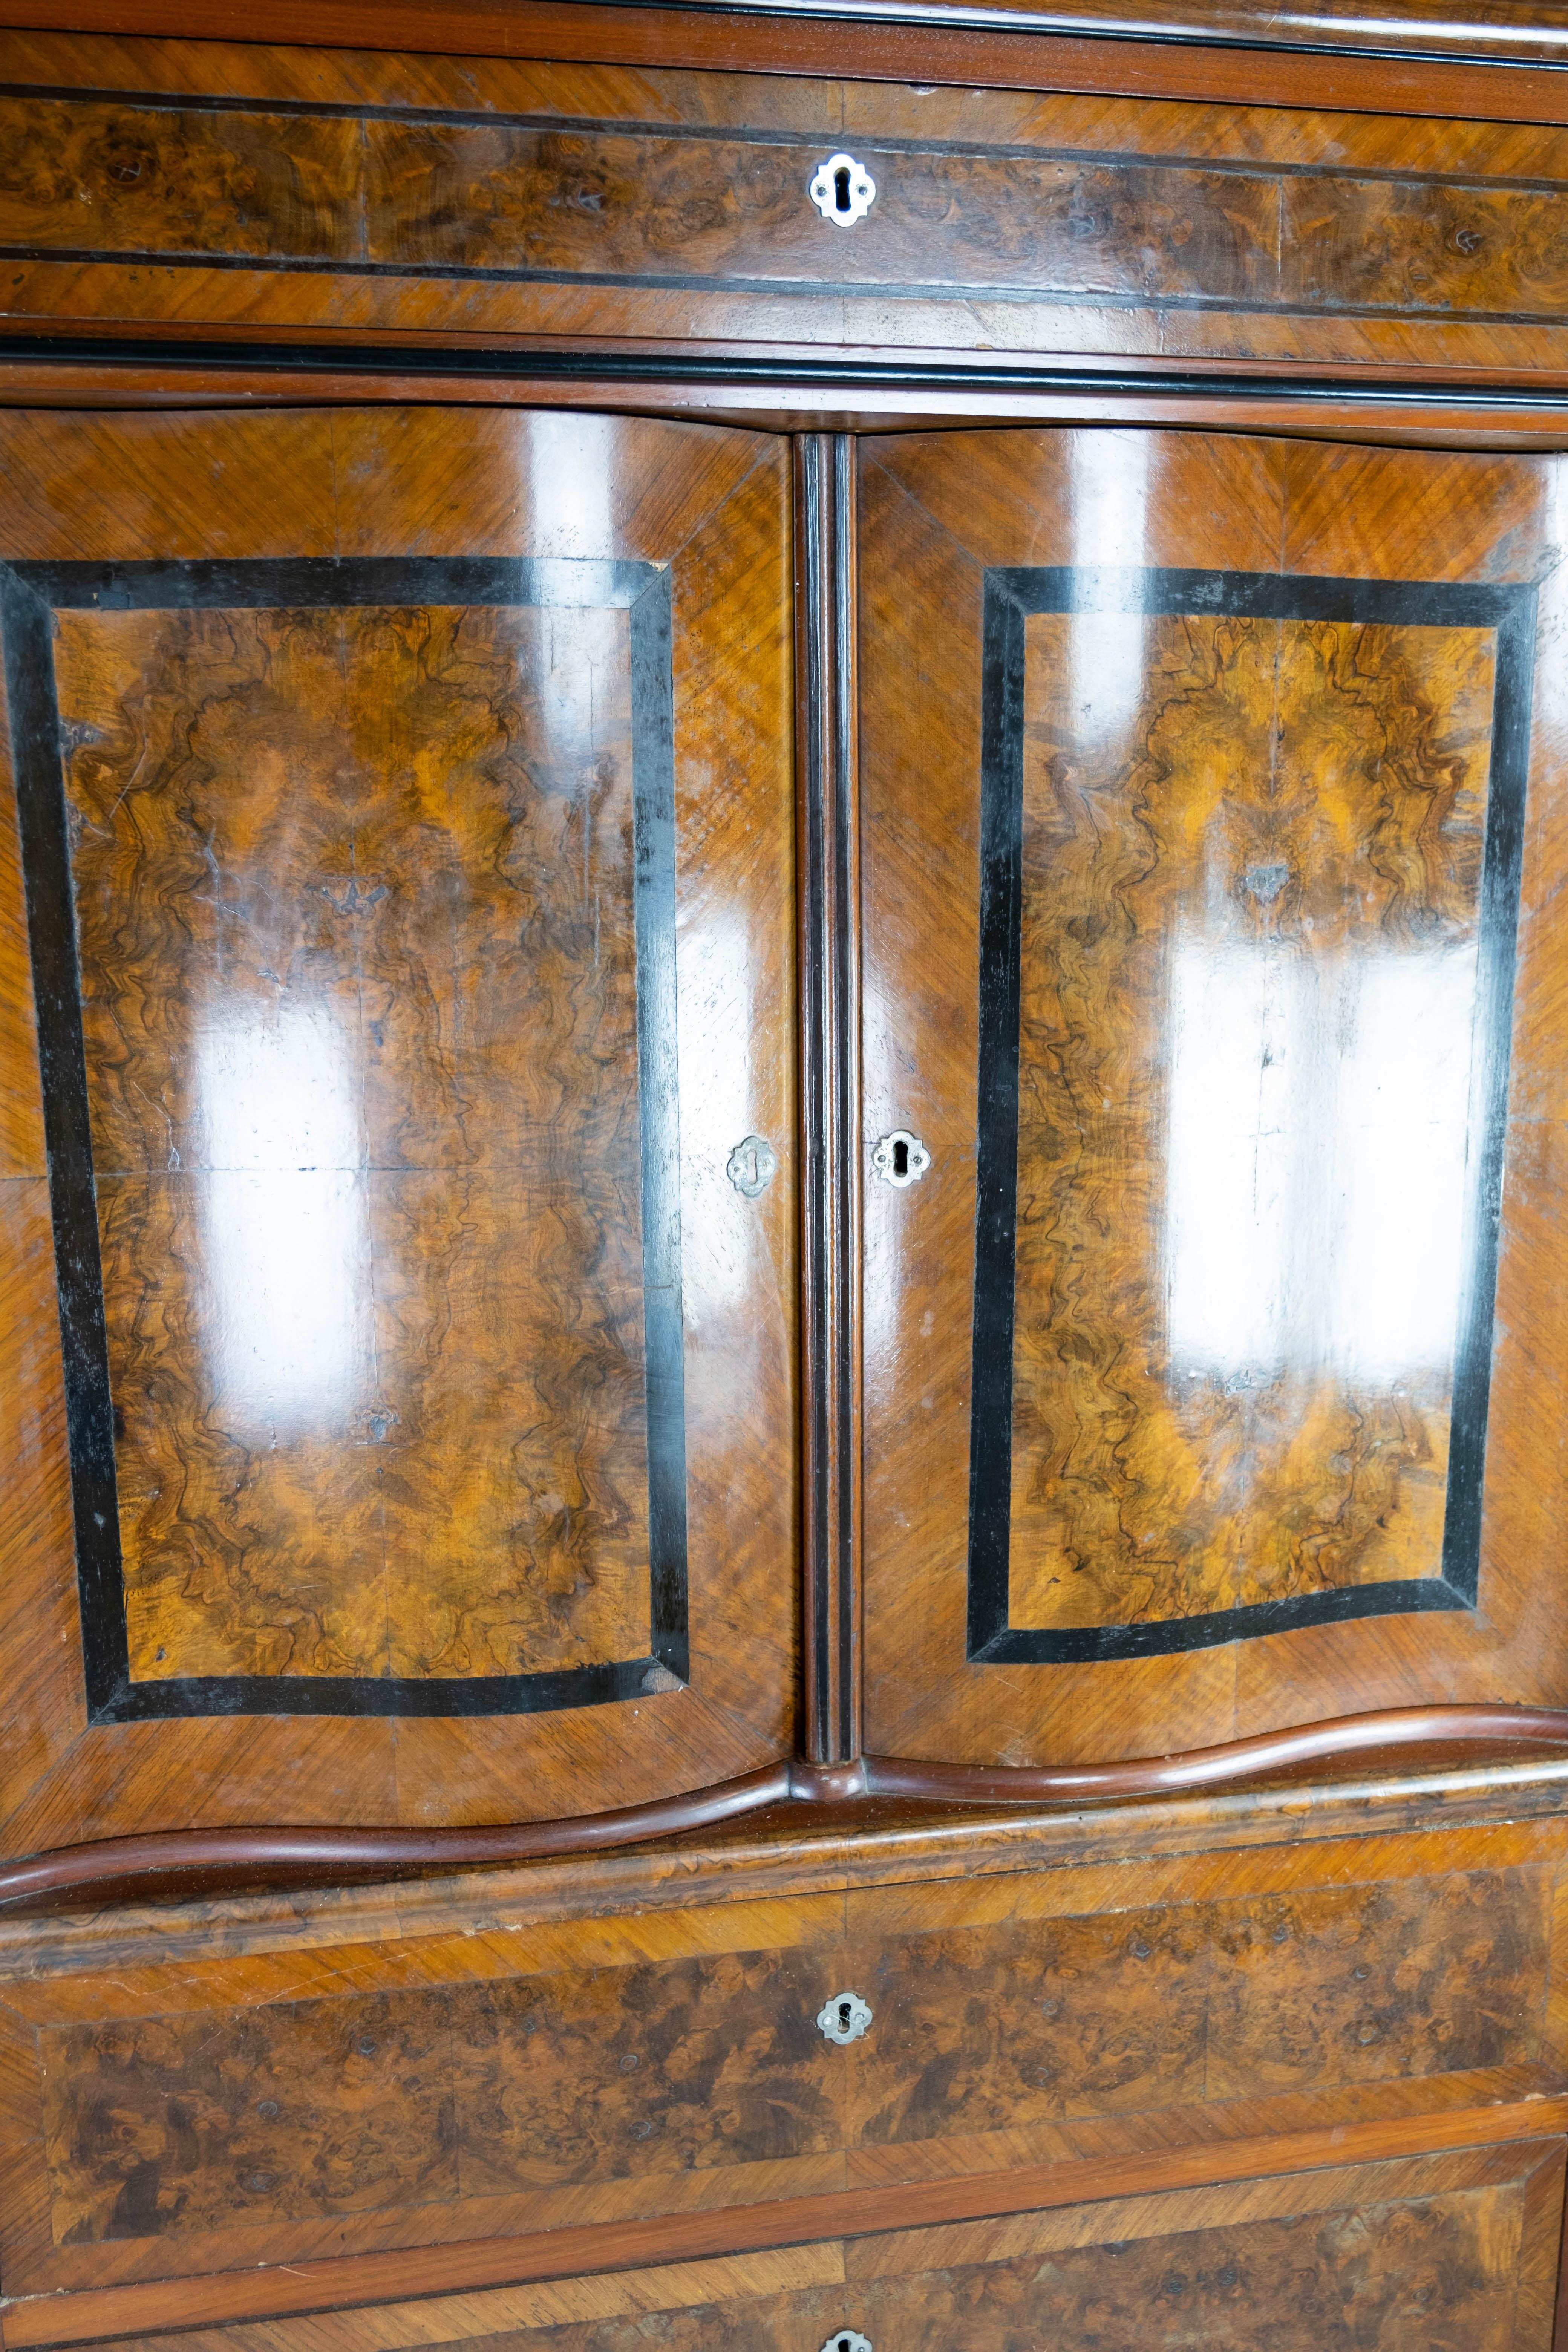 Other Large Cabinet of Polished Mahogany and Walnut, in Great Antique Condition, 1880